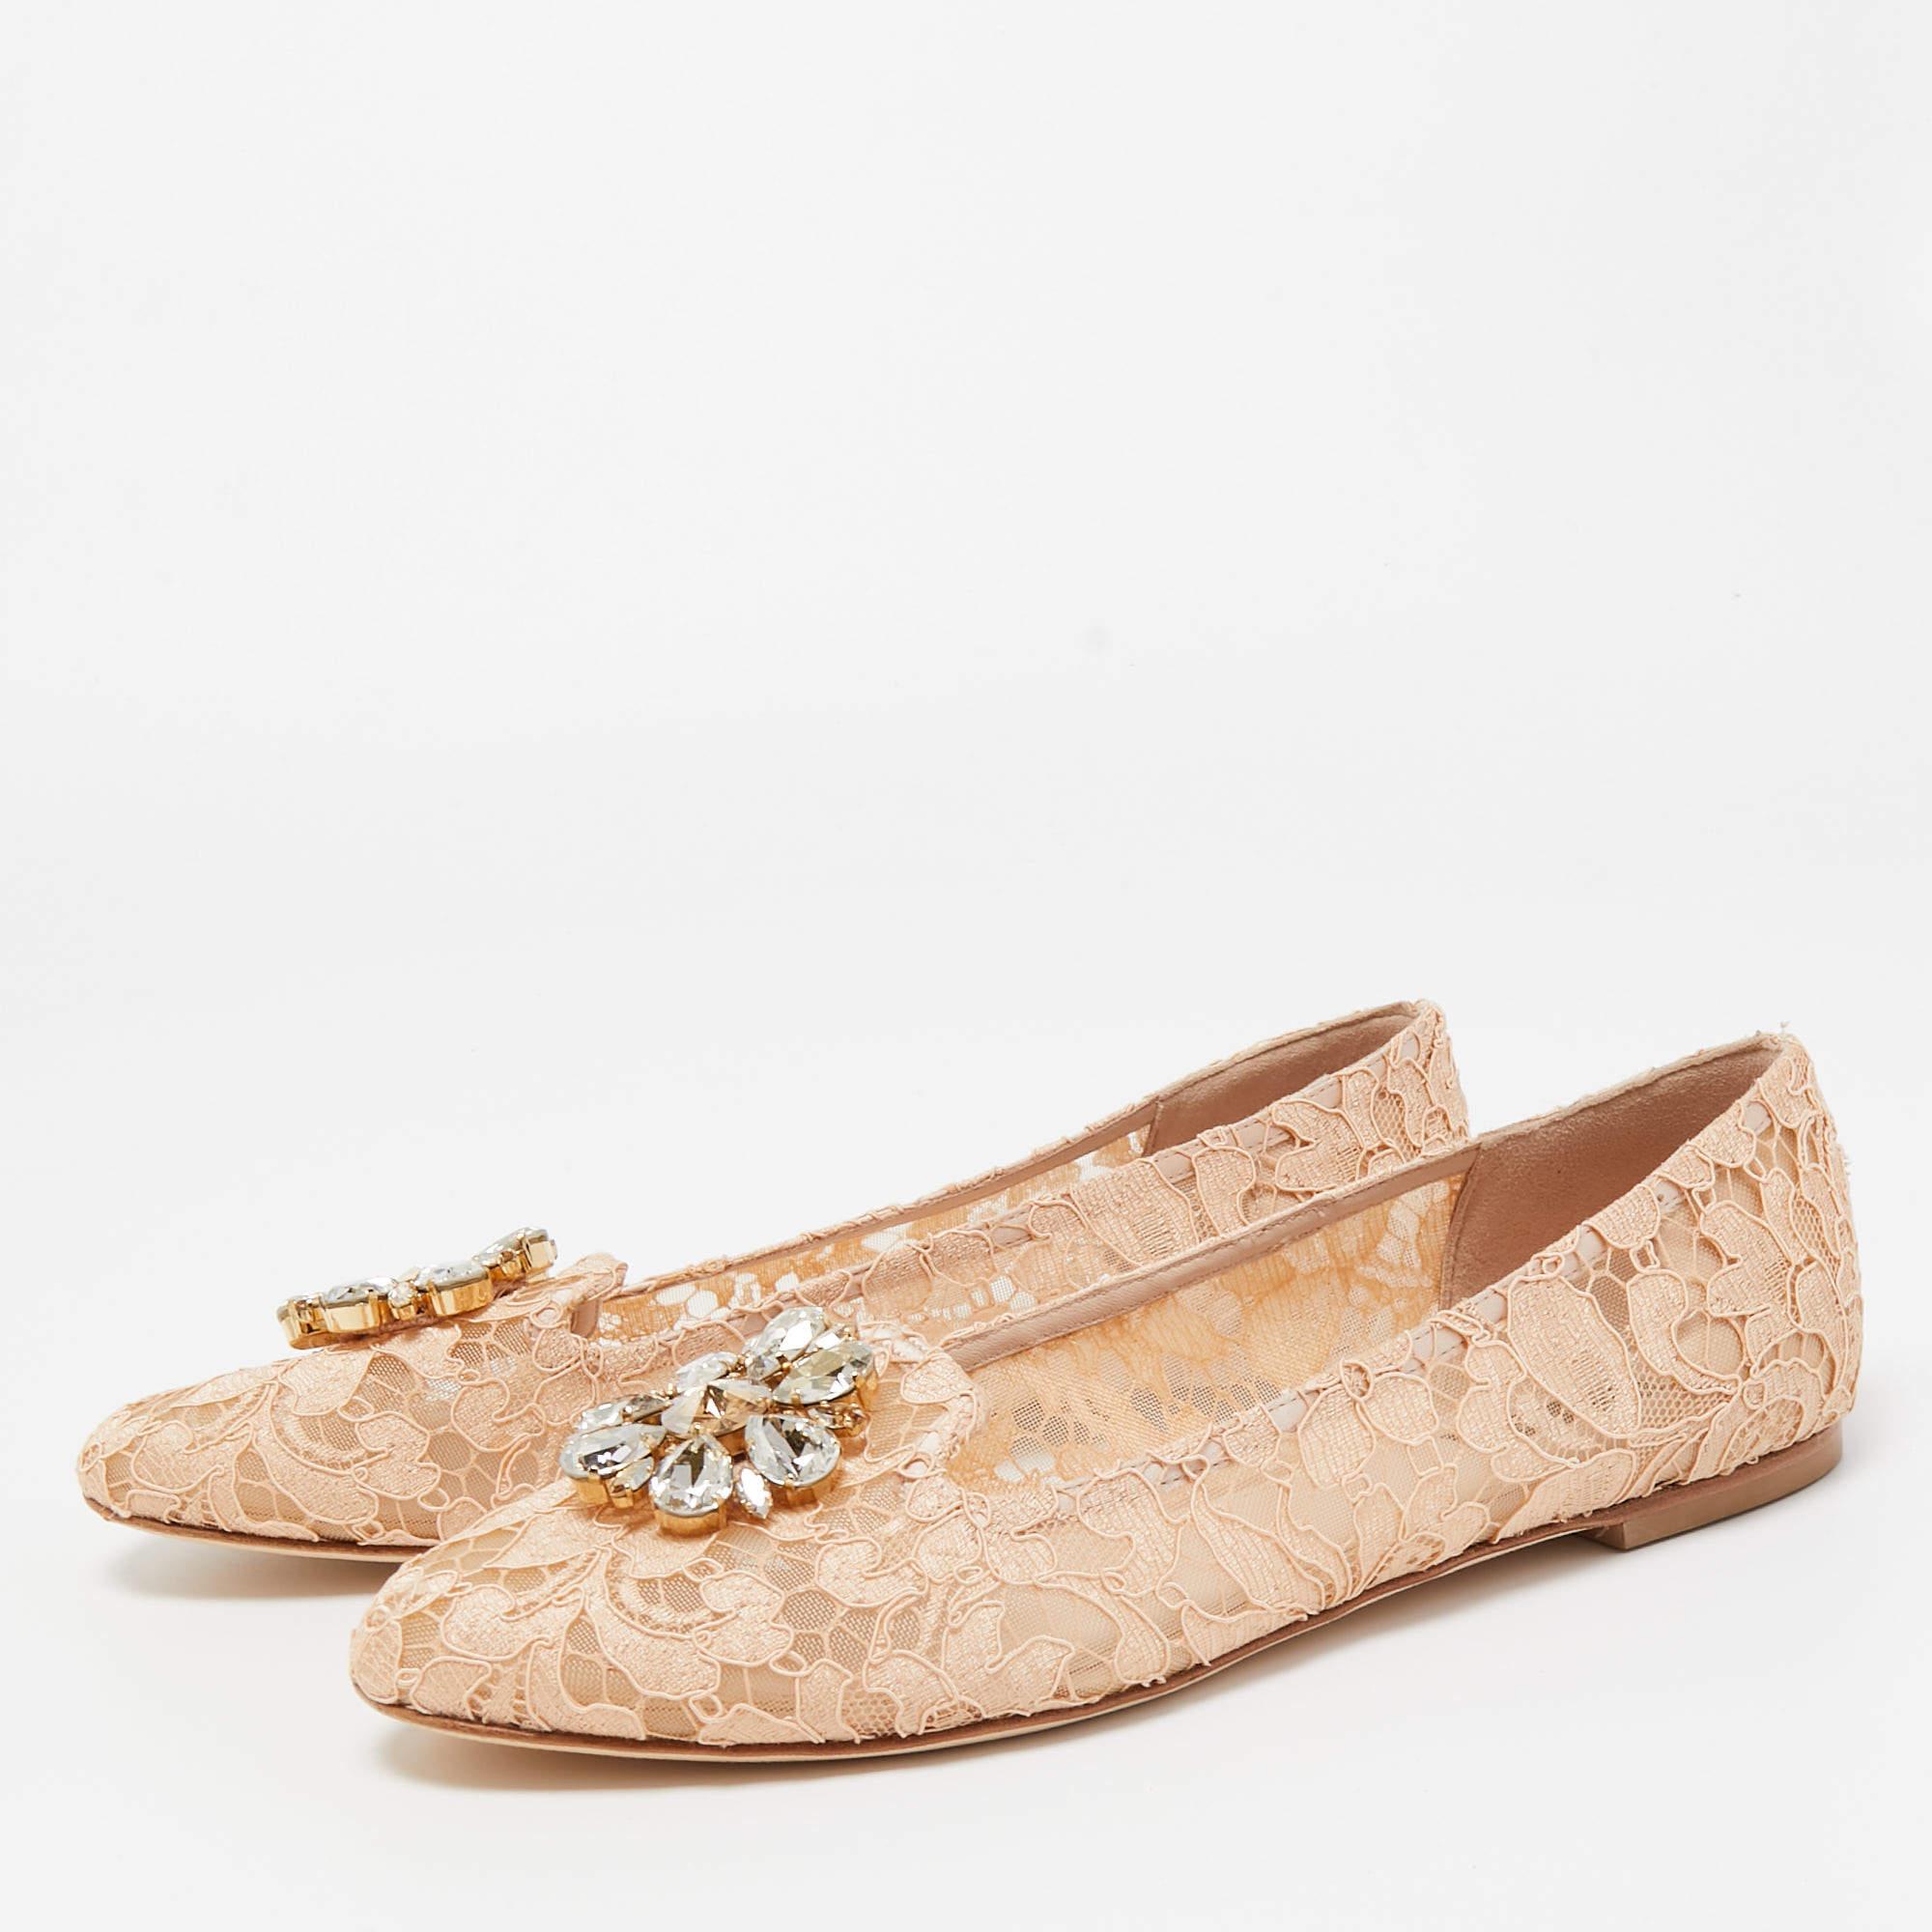 Made from lace, these Dolce & Gabbana flats are the ultimate glamor pair. Their exterior comes with Bellucci crystal embellishments on their pointed toes. The interiors are leather lined.

